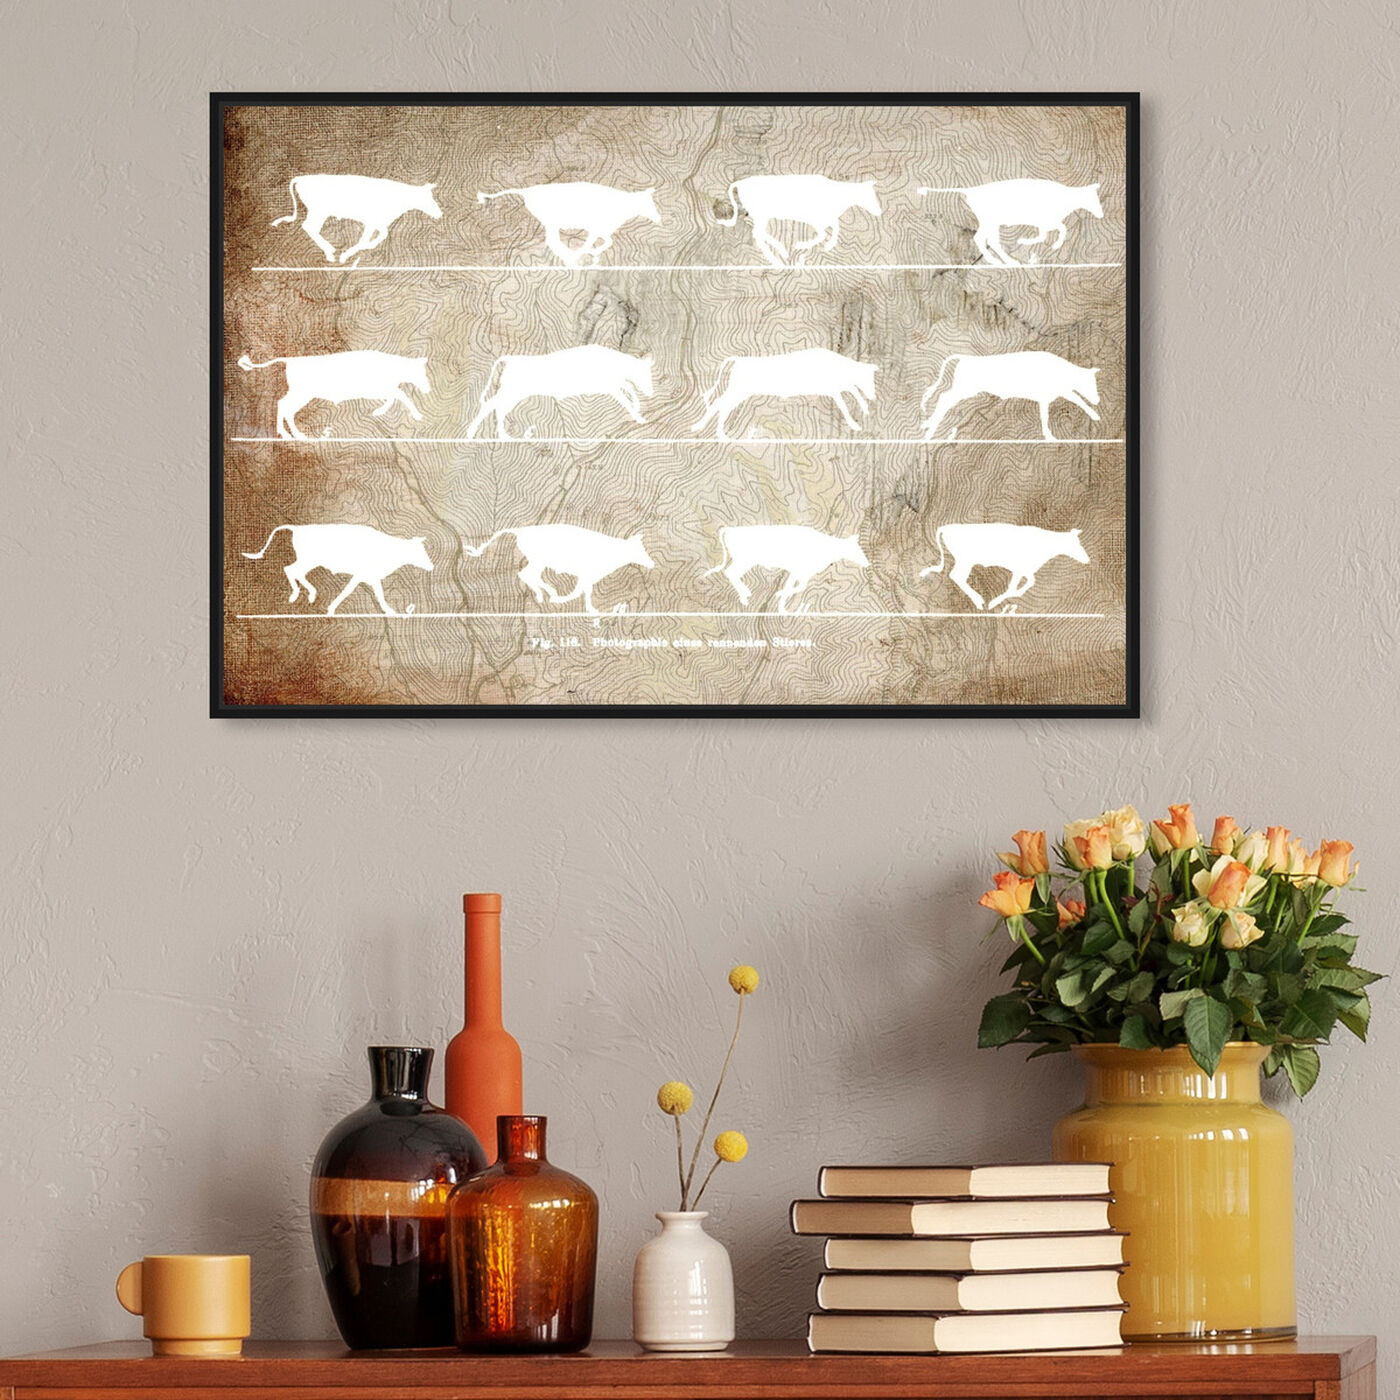 Hanging view of Cows in Motion featuring animals and farm animals art.